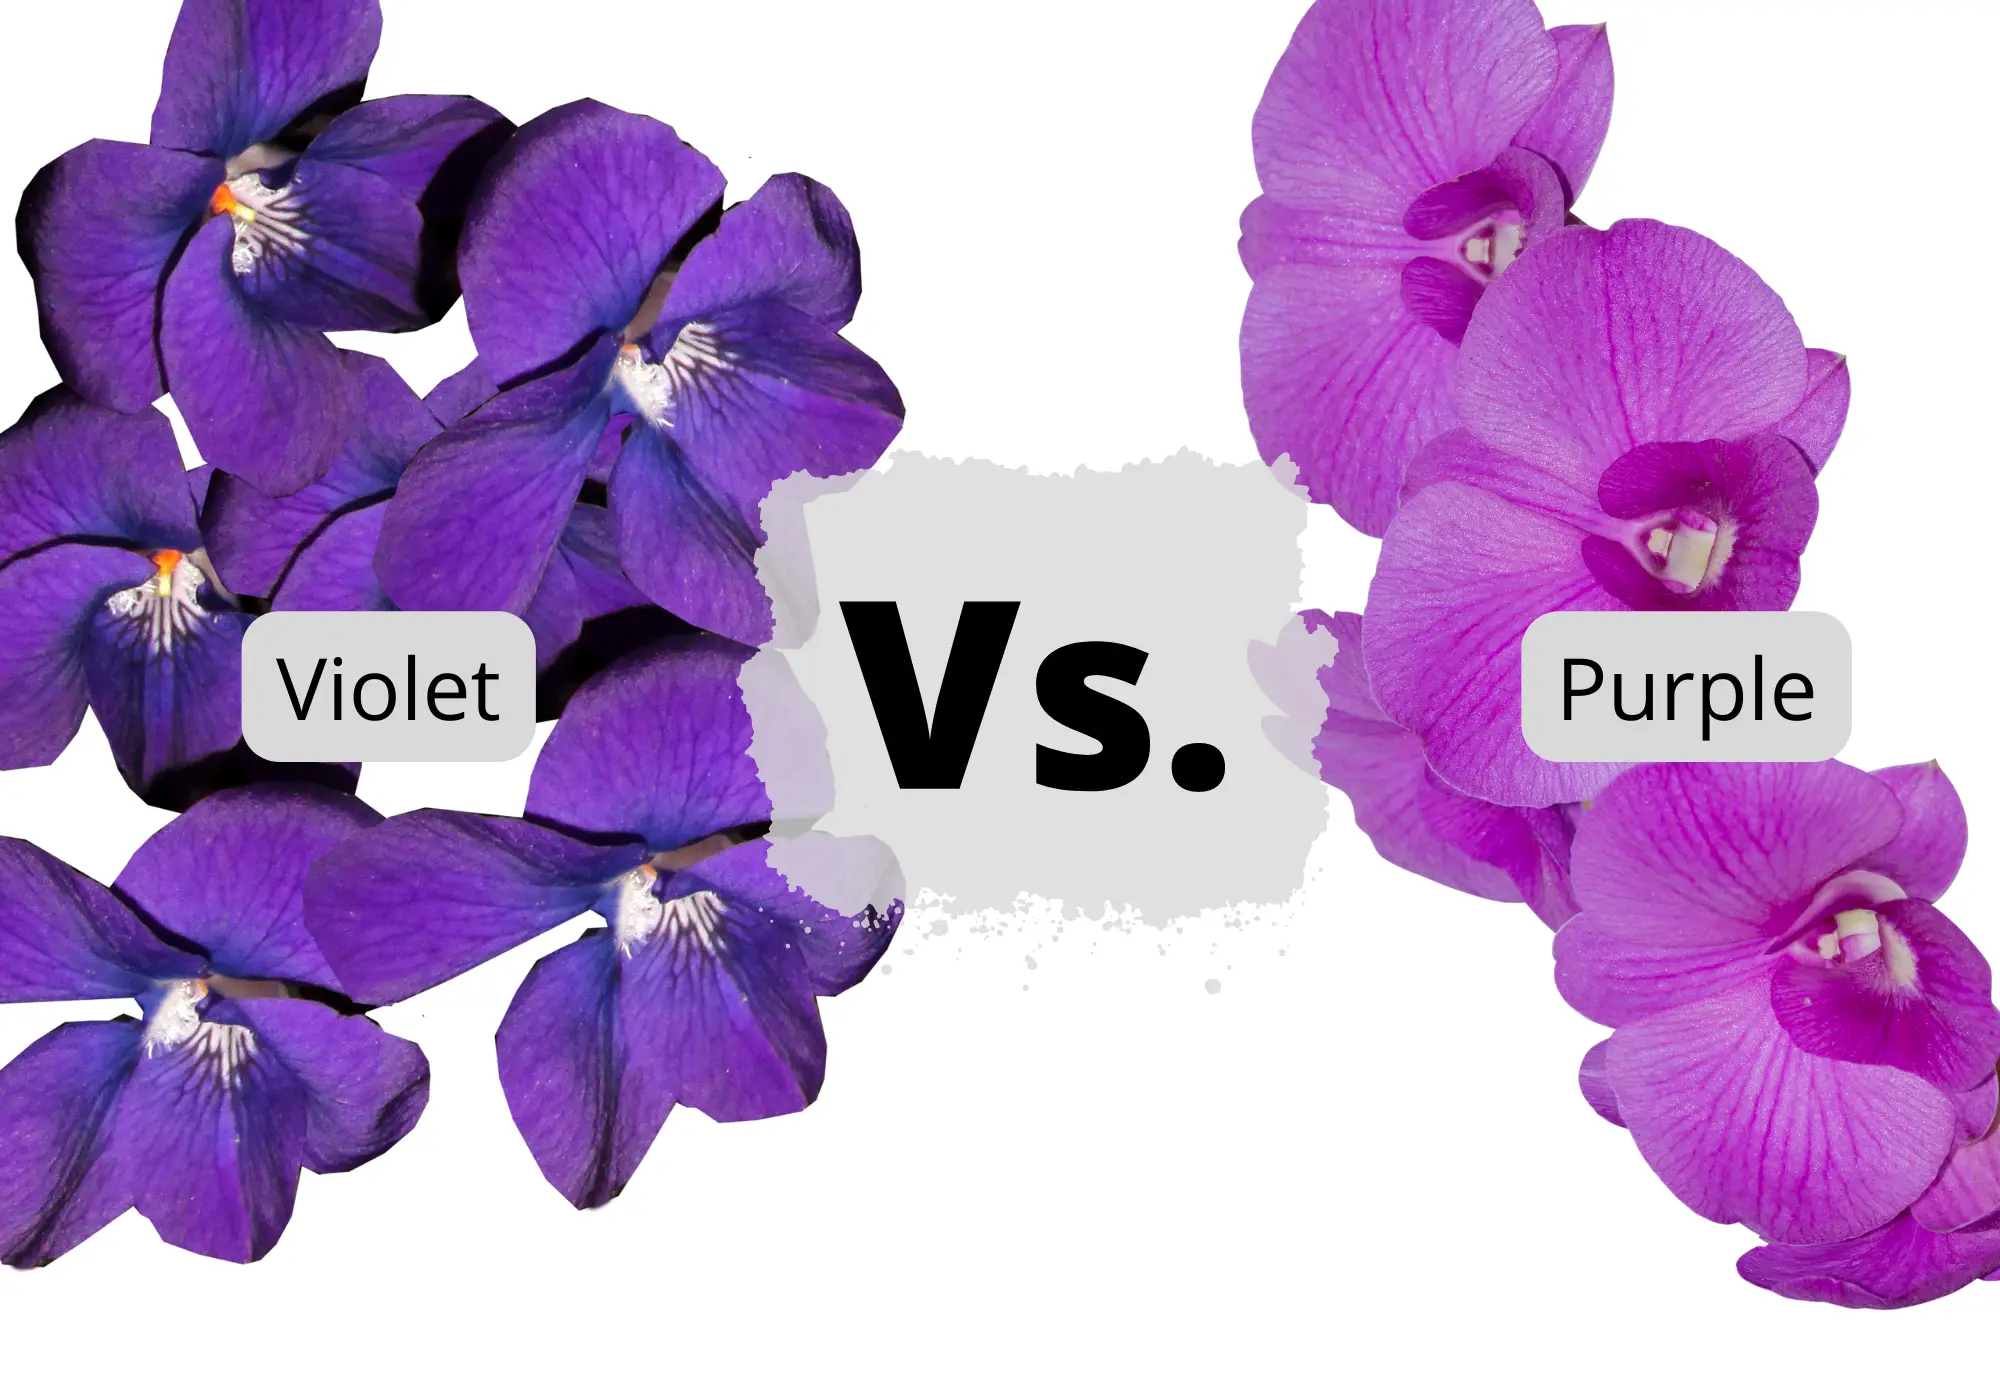 Violet vs. Purple: difference explained in simple terms